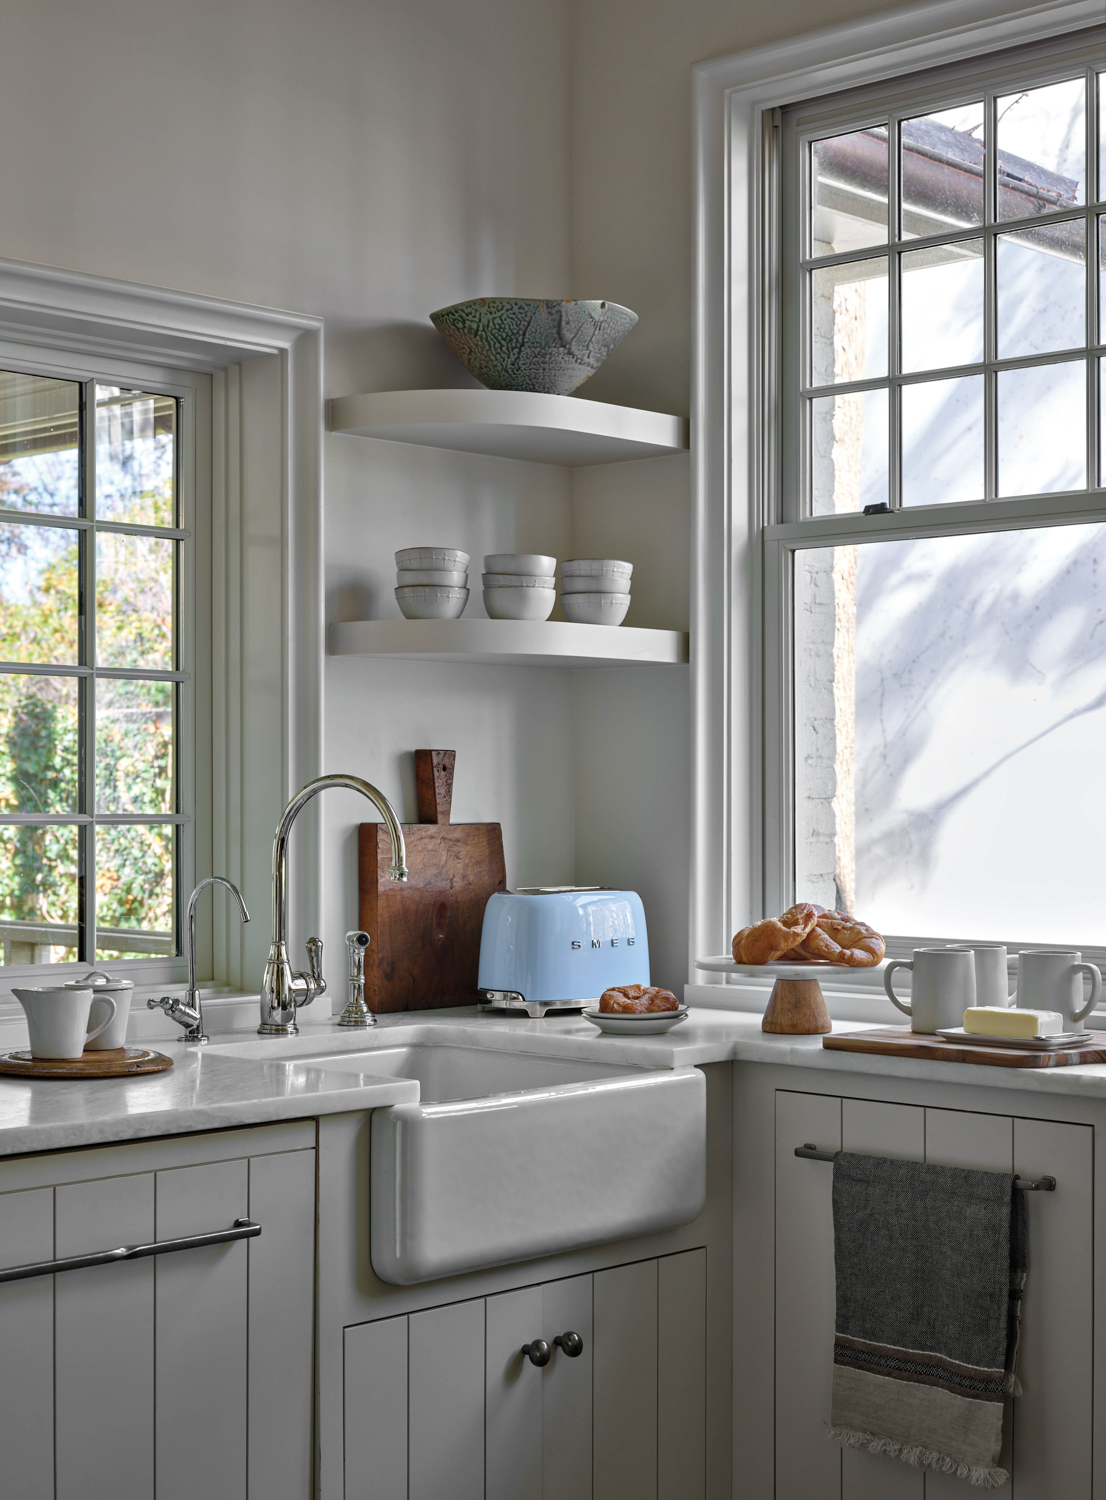 Scullery kitchen with open shelving,...